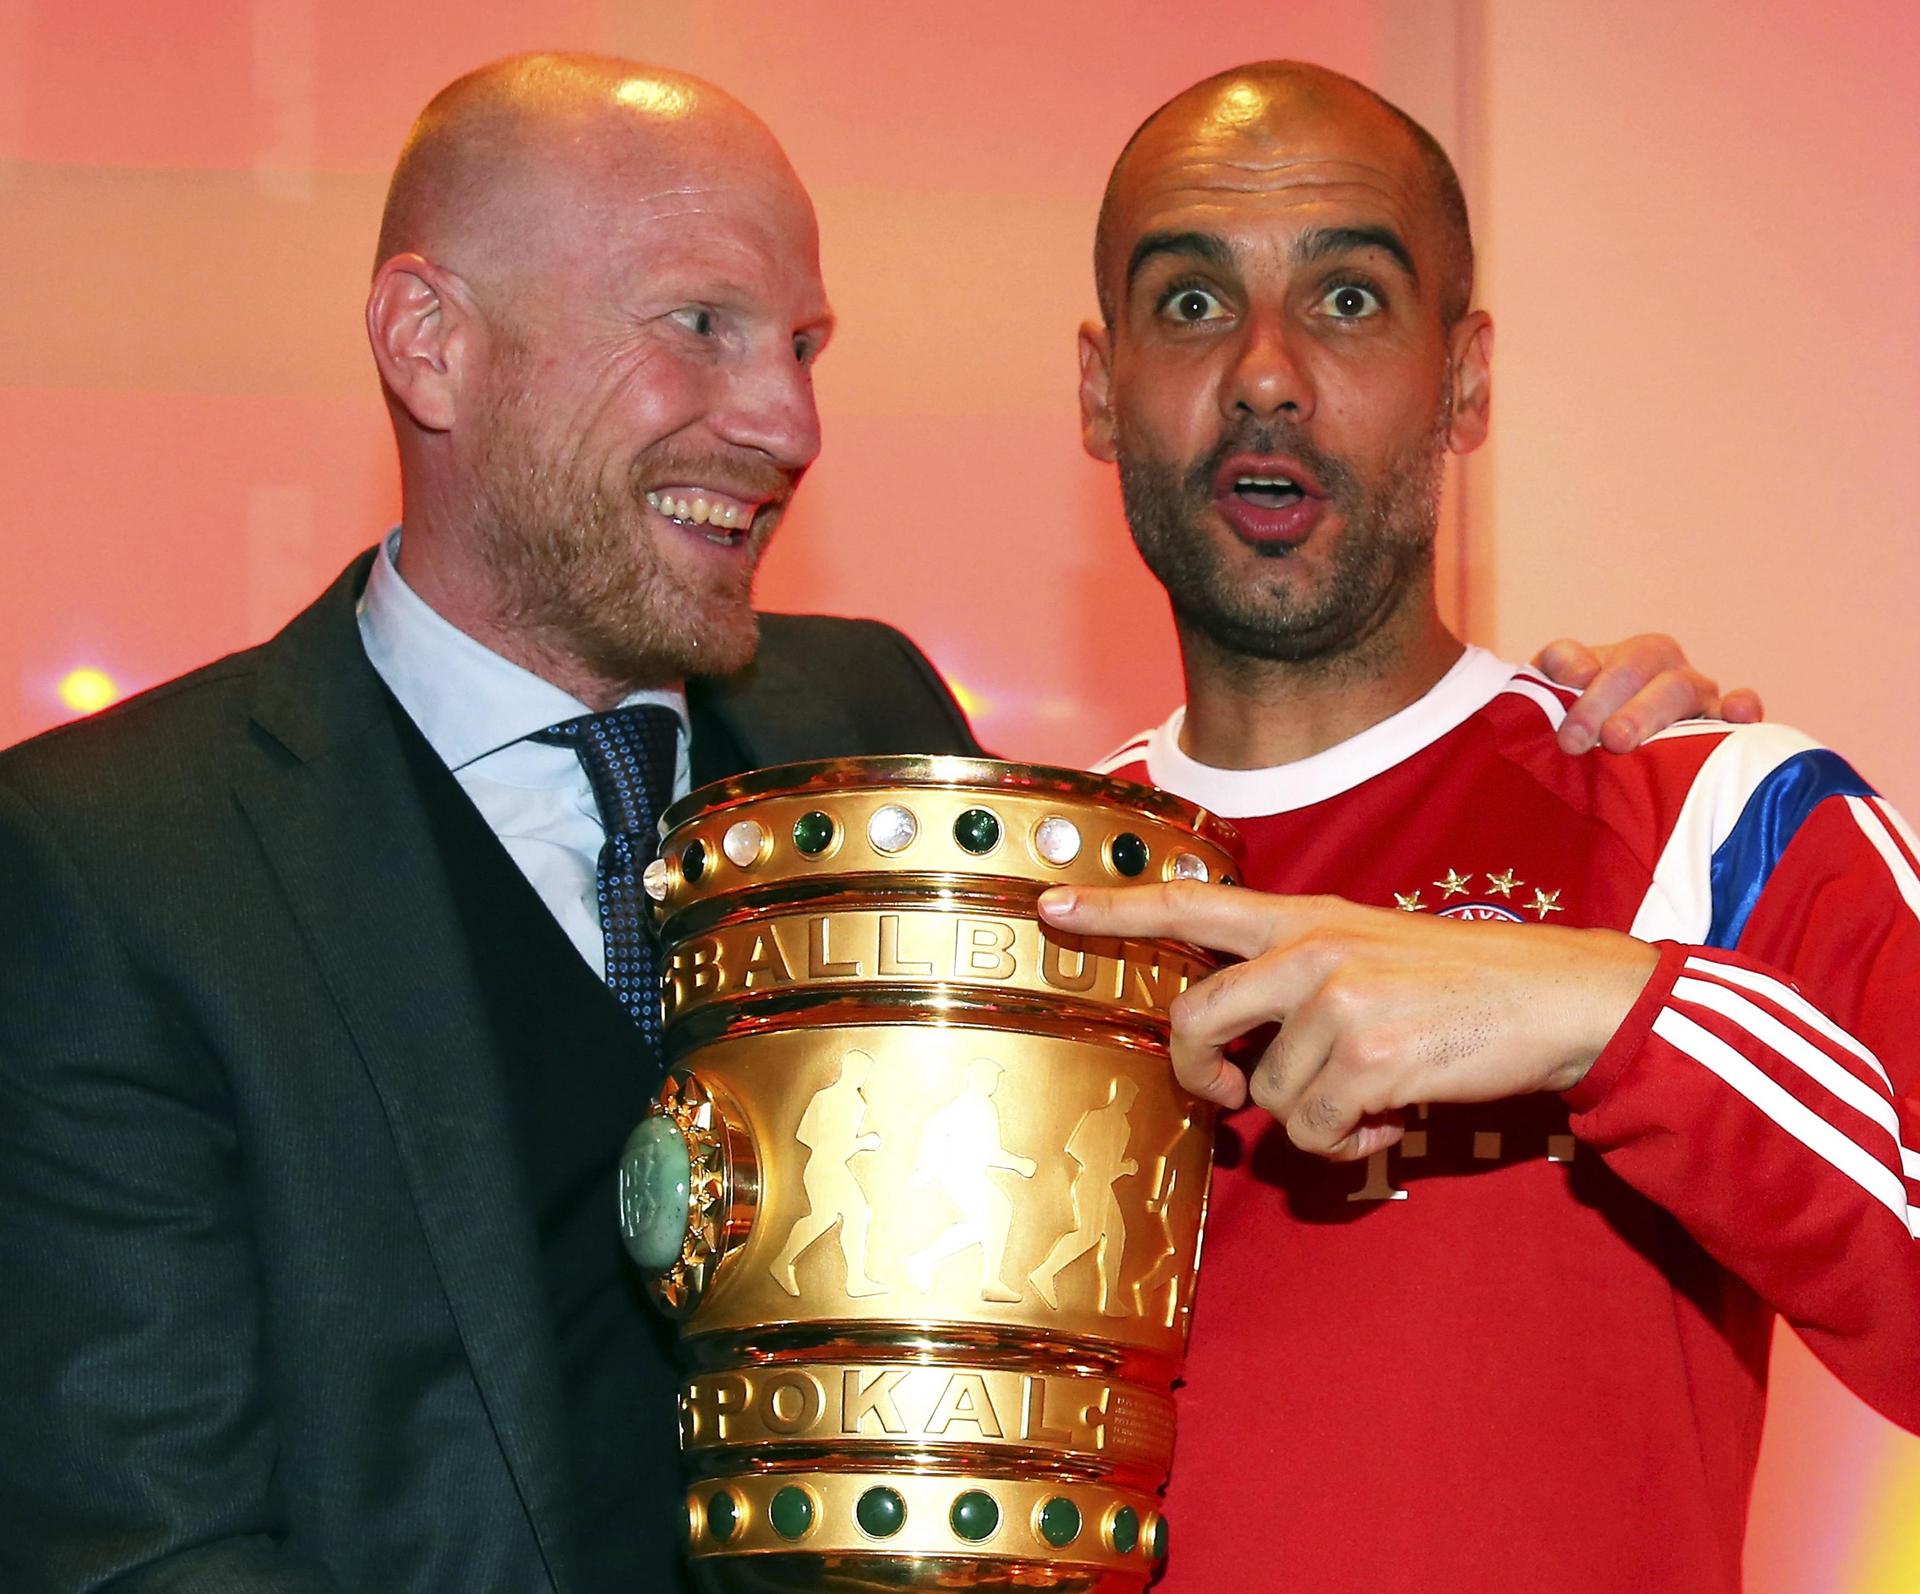 Pep Guardiola celebrates winning the German DFB Cup with Bayern's sports director Matthias Sammer in May, completing a domestic double. Guardiola is satisfied the squad are buying in to his system of play and he plans to continue his revolution with the Bavarian giants, as documented in Marti Peraranu's new book Pep Confidential, excerpted on this page. Photos: AFP, Reuters, EPA, AP